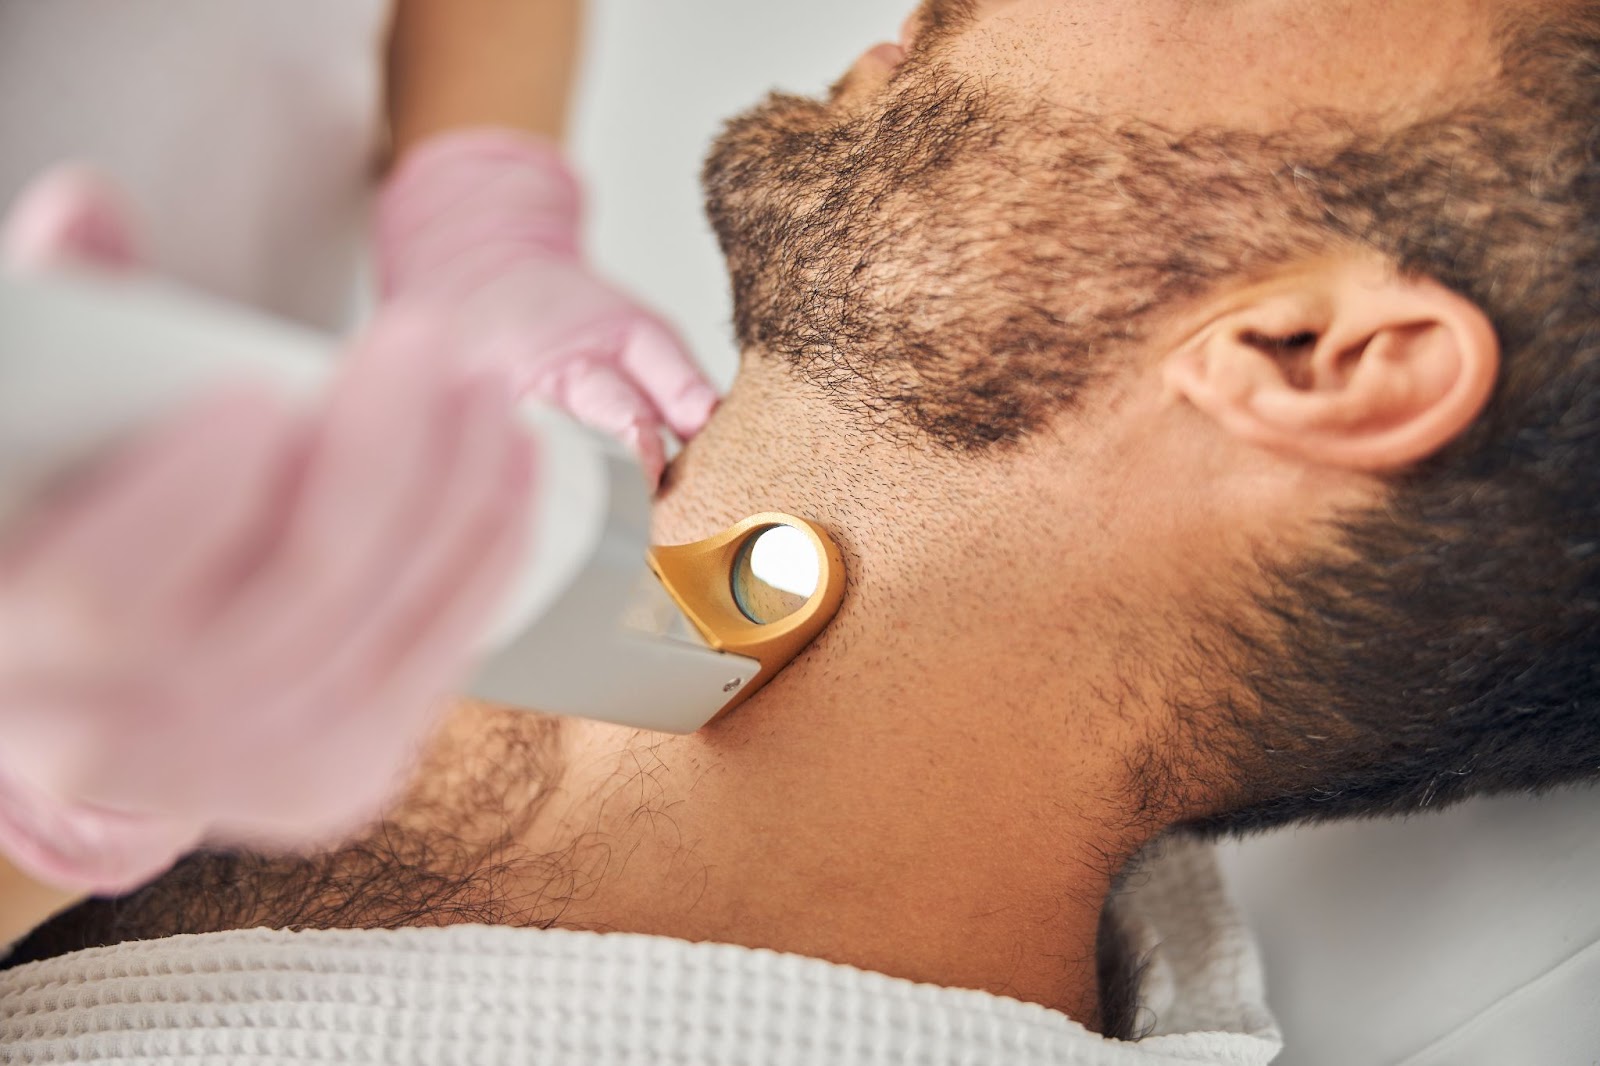 Image of a male having laser hair removal for beard